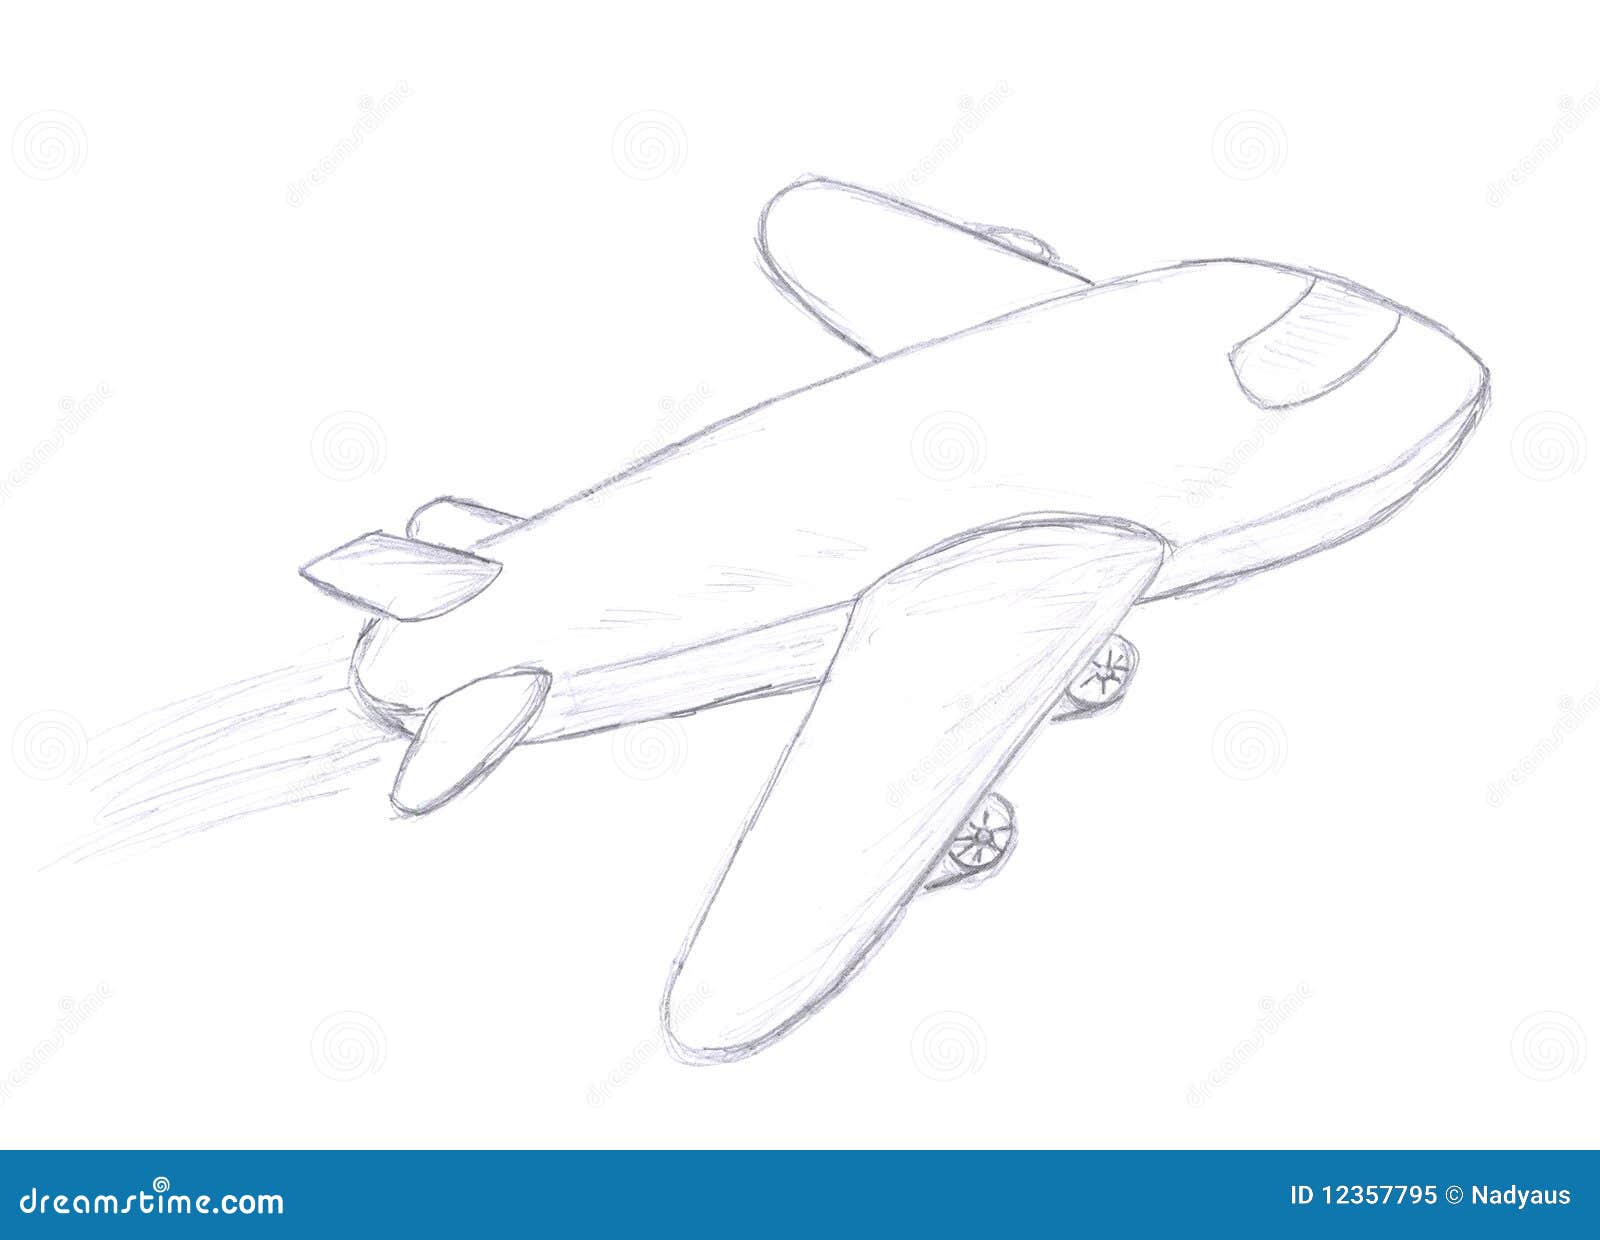 How to Draw an Airplane  Easy Drawing Art